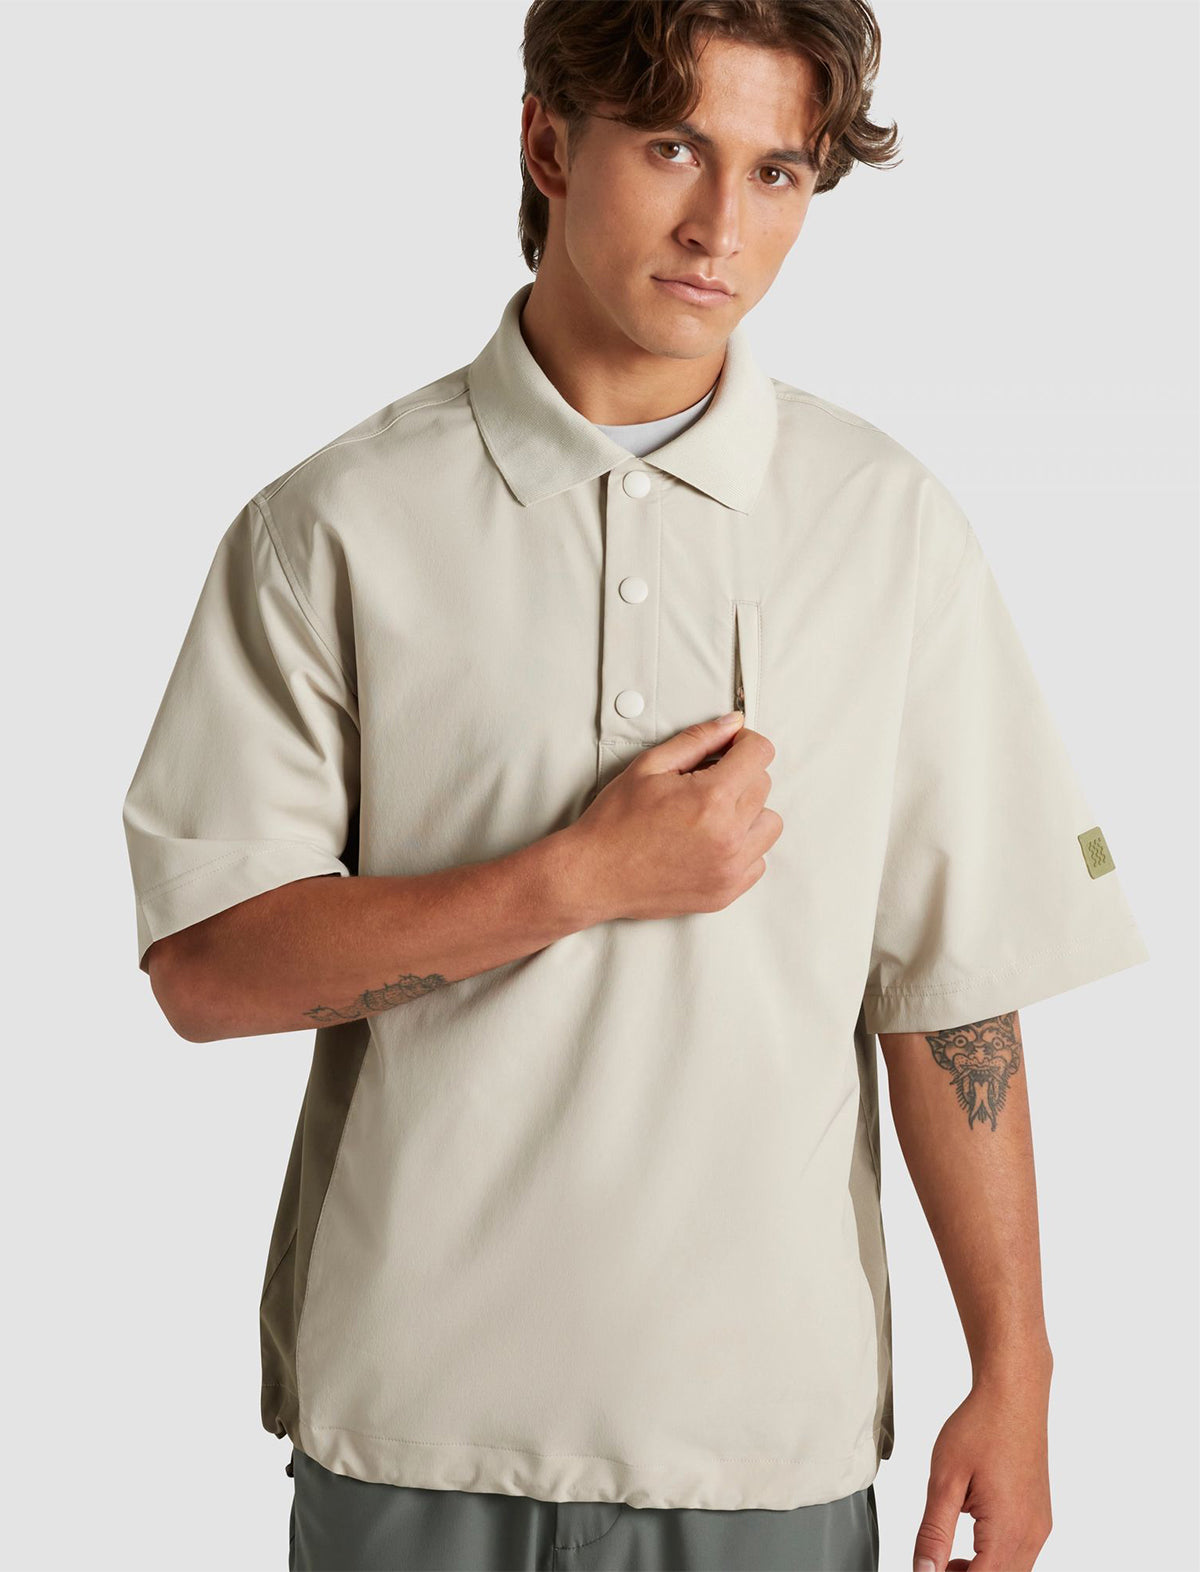 MANORS GOLF Shooter Shirt in Sand